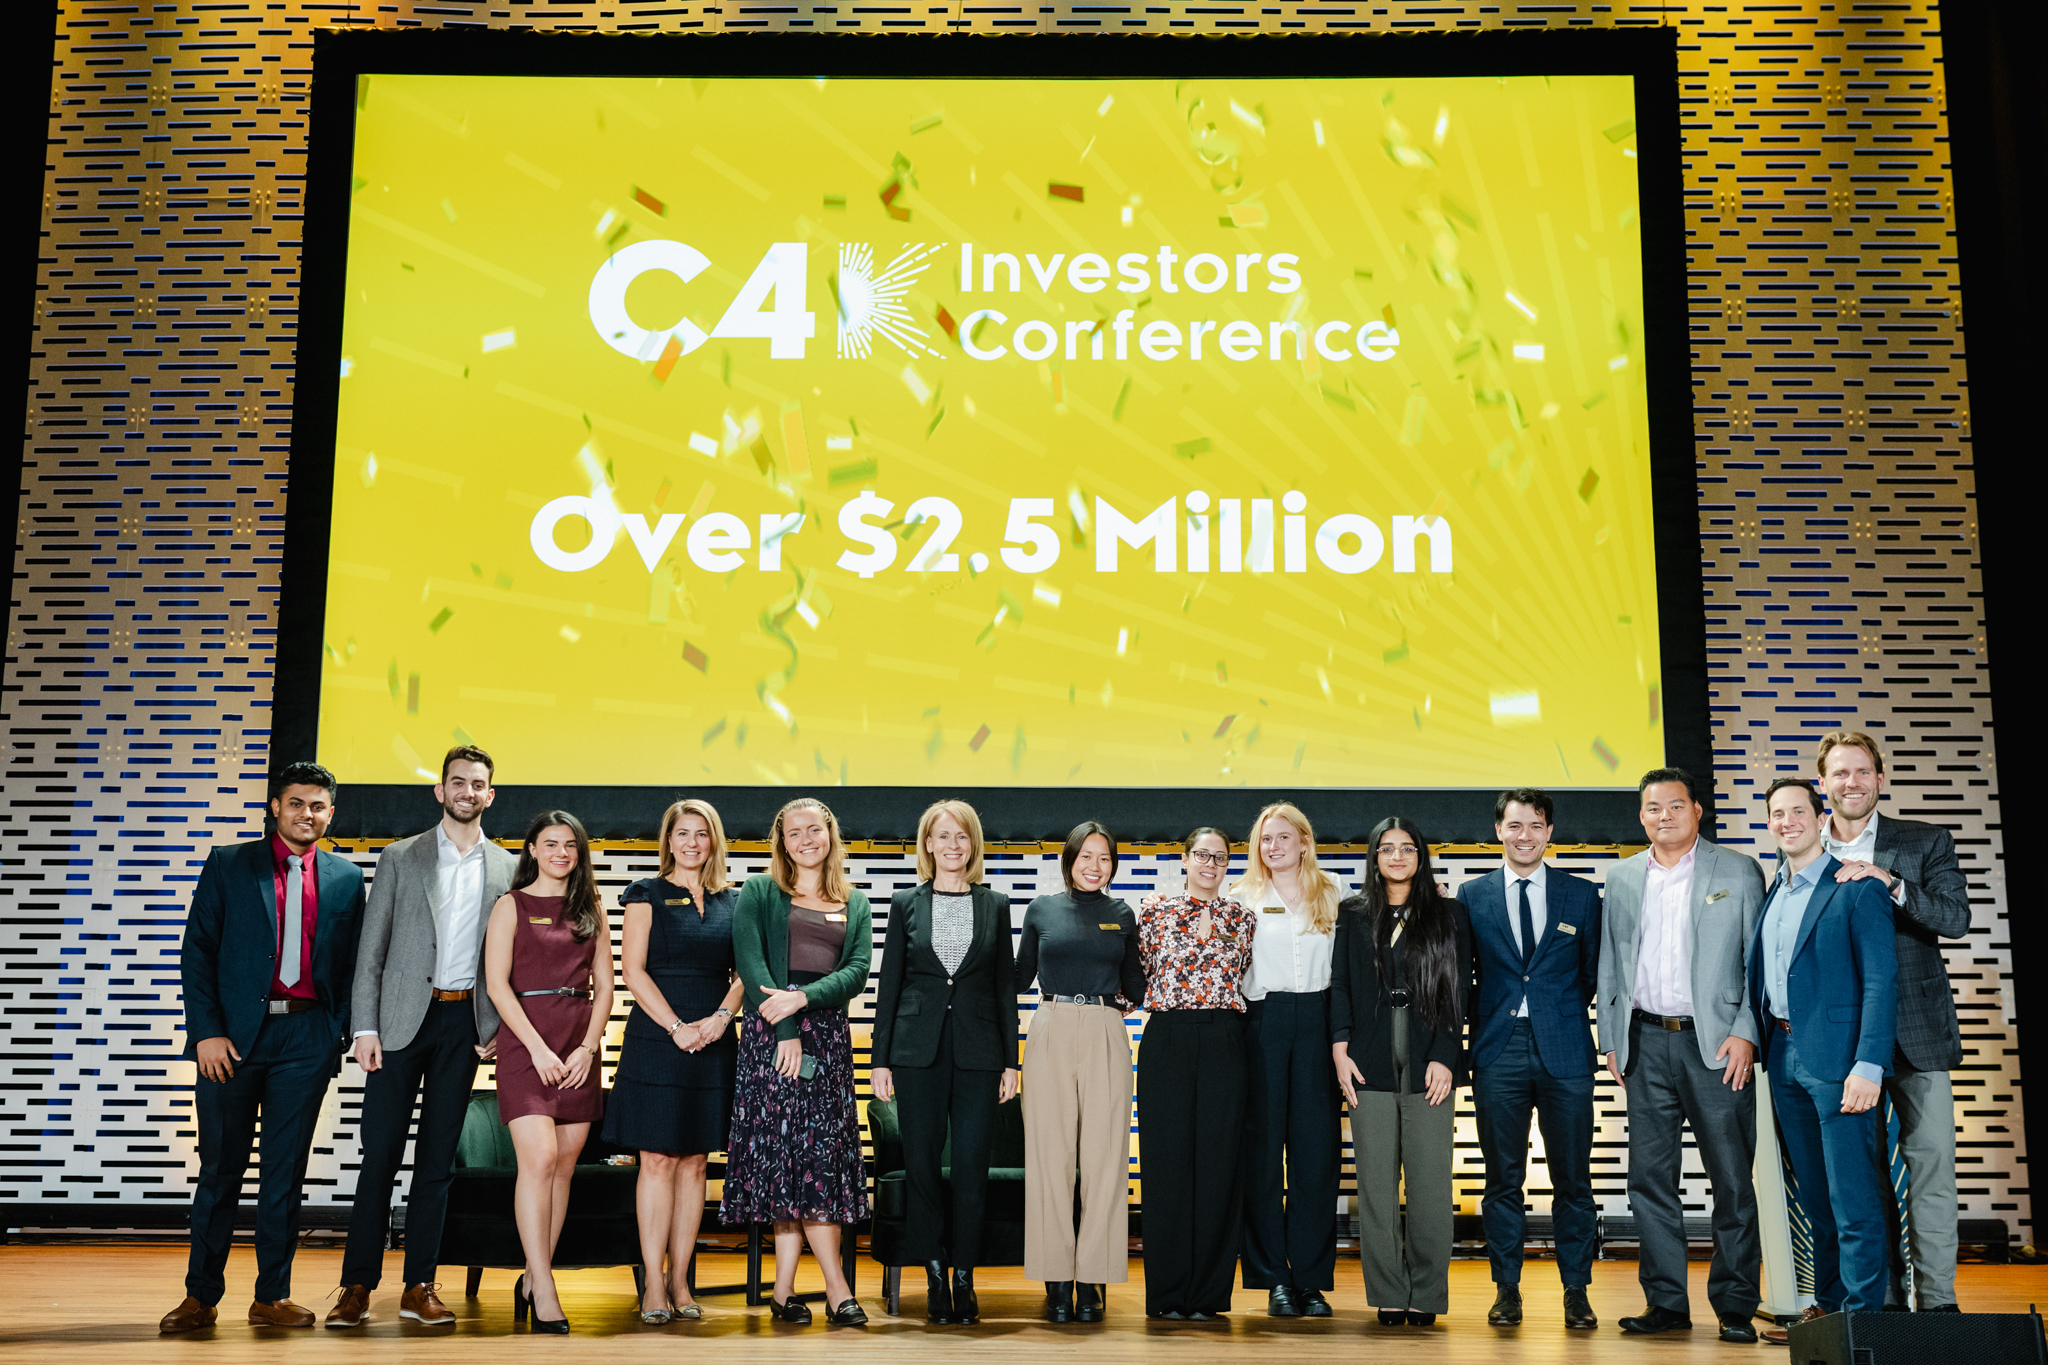 A group of people at a conference, standing in front of a large screen displaying the words "CA Investors Conference" with over $22 million.